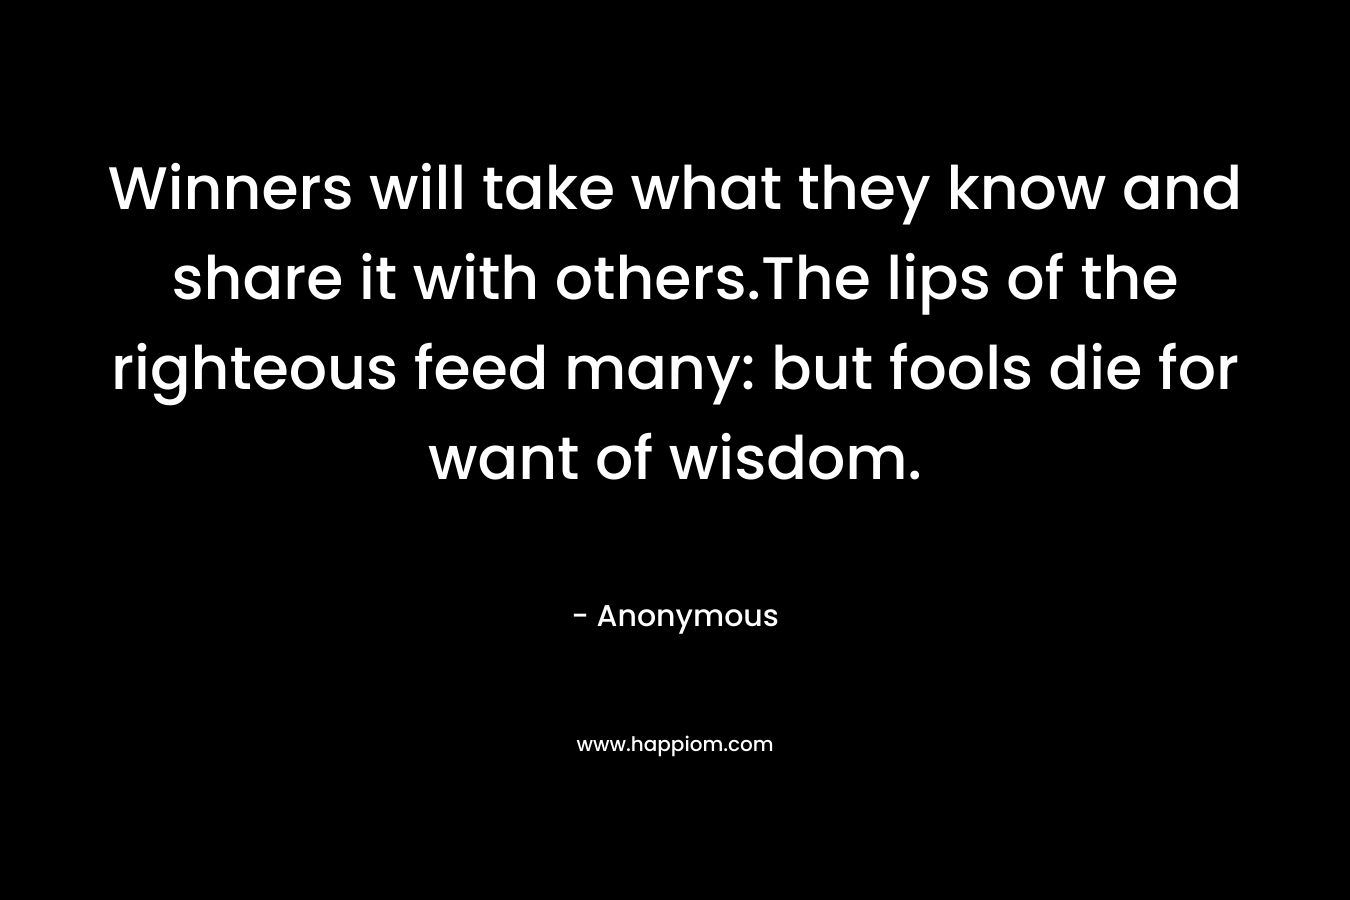 Winners will take what they know and share it with others.The lips of the righteous feed many: but fools die for want of wisdom.